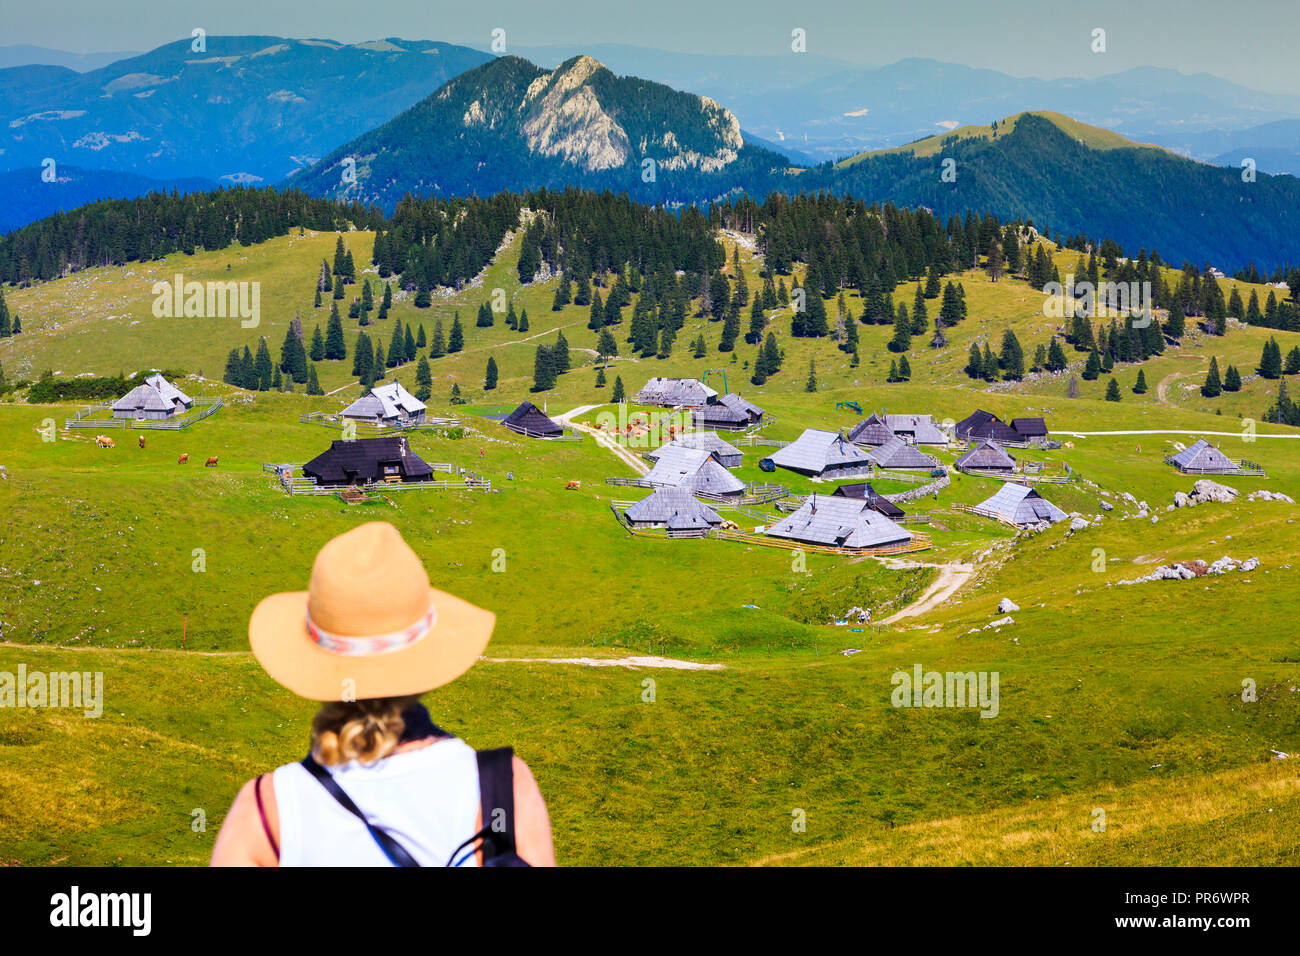 Mountains in summer with woman and huts. Stock Photo